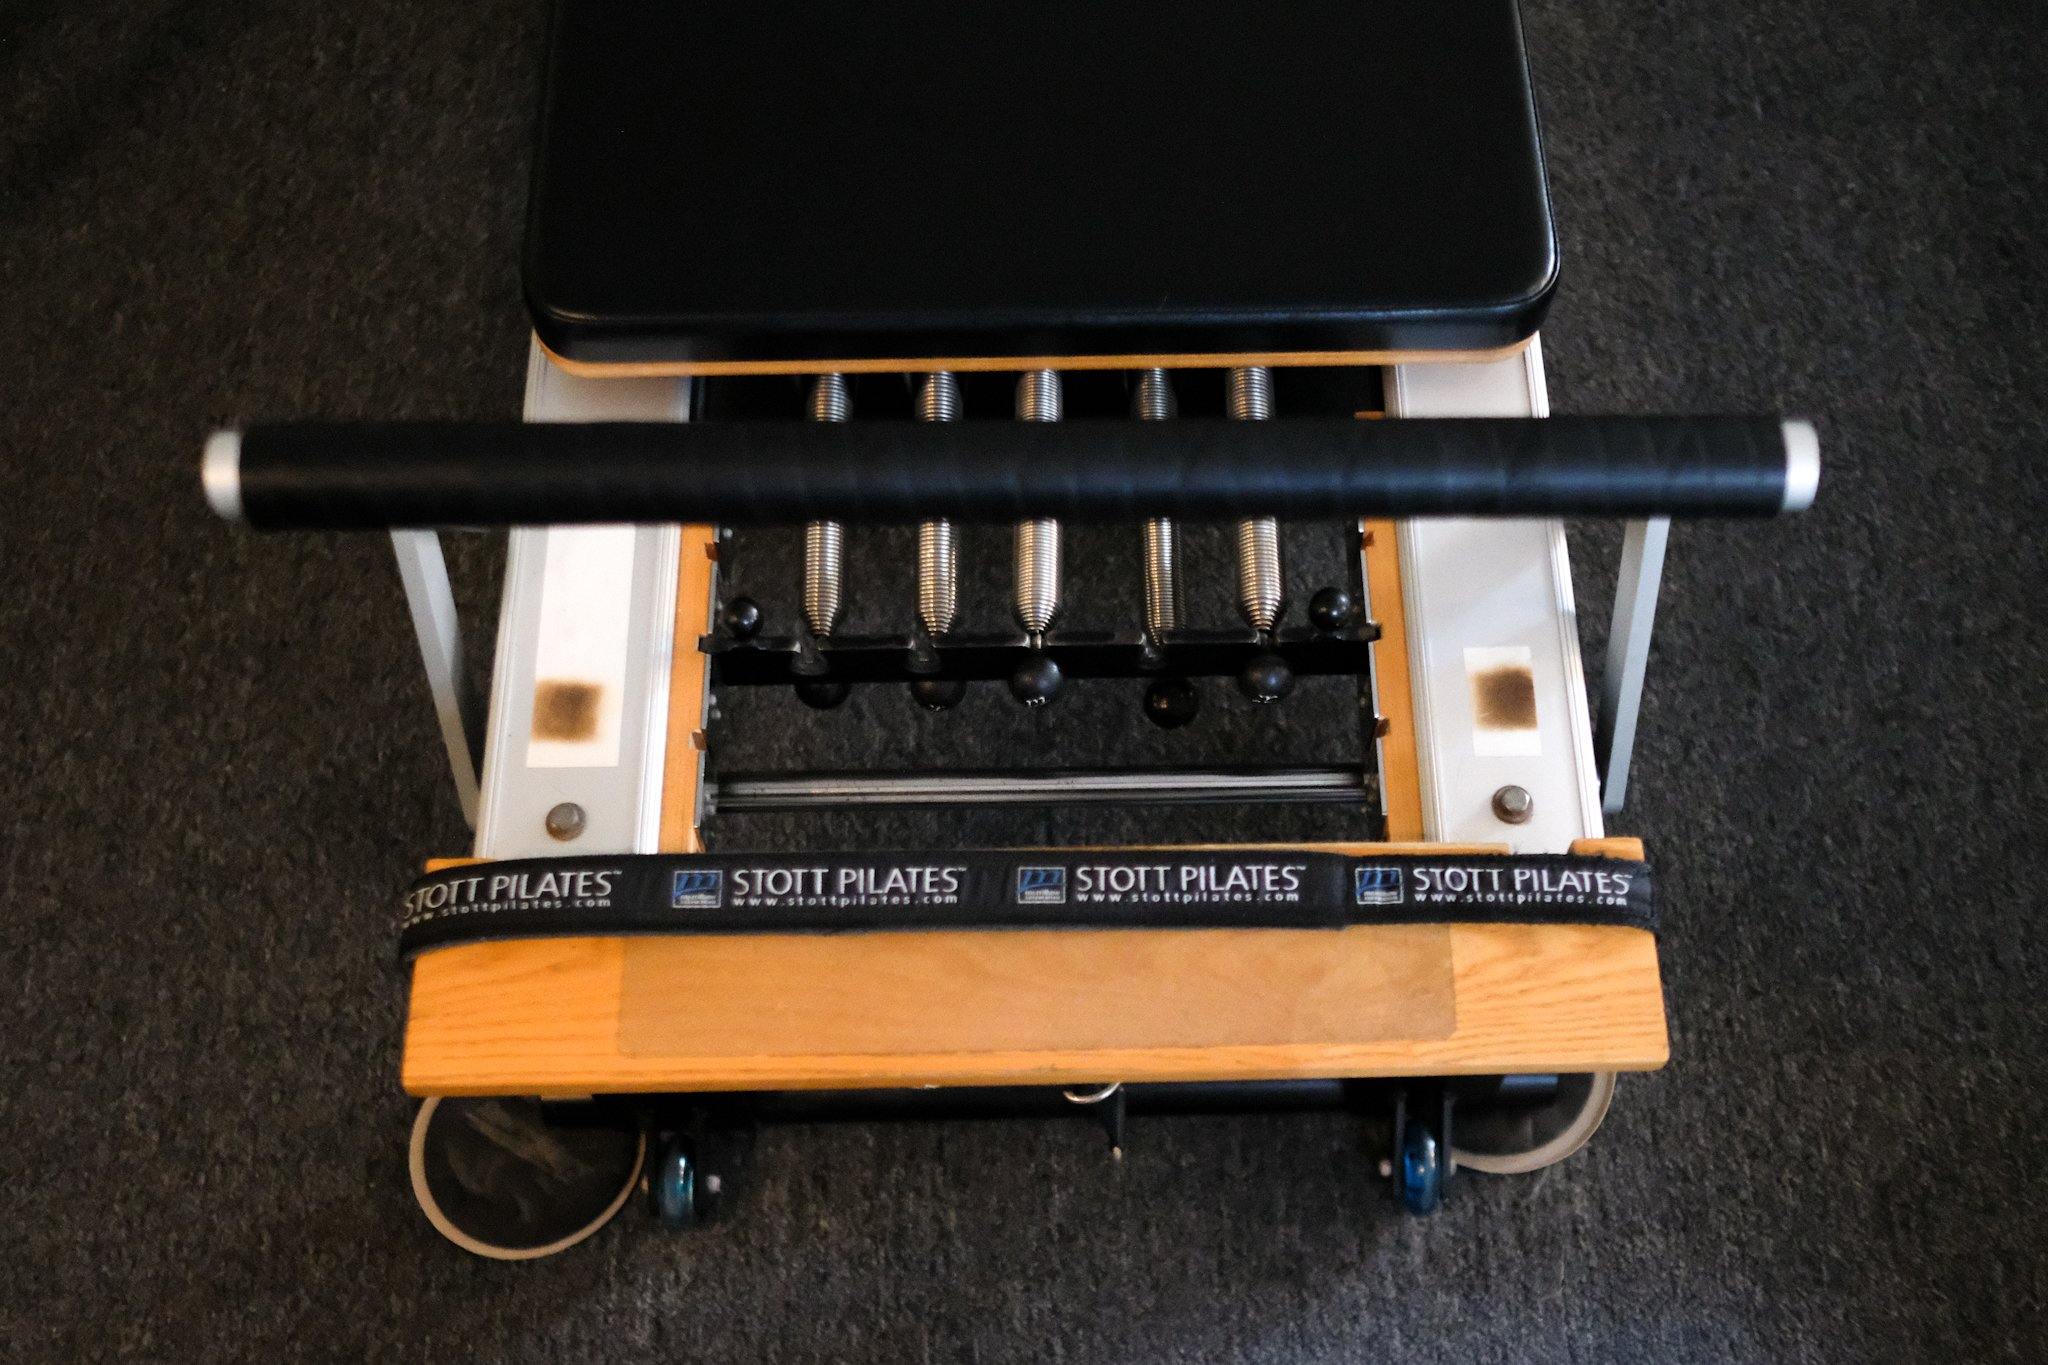  The Pilates reformer is the cornerstone of our Pilates classes. Its unique design features a sliding carriage, springs, and straps that provide resistance, helping to strengthen and tone muscles. The reformer allows for a wide range of exercises tha